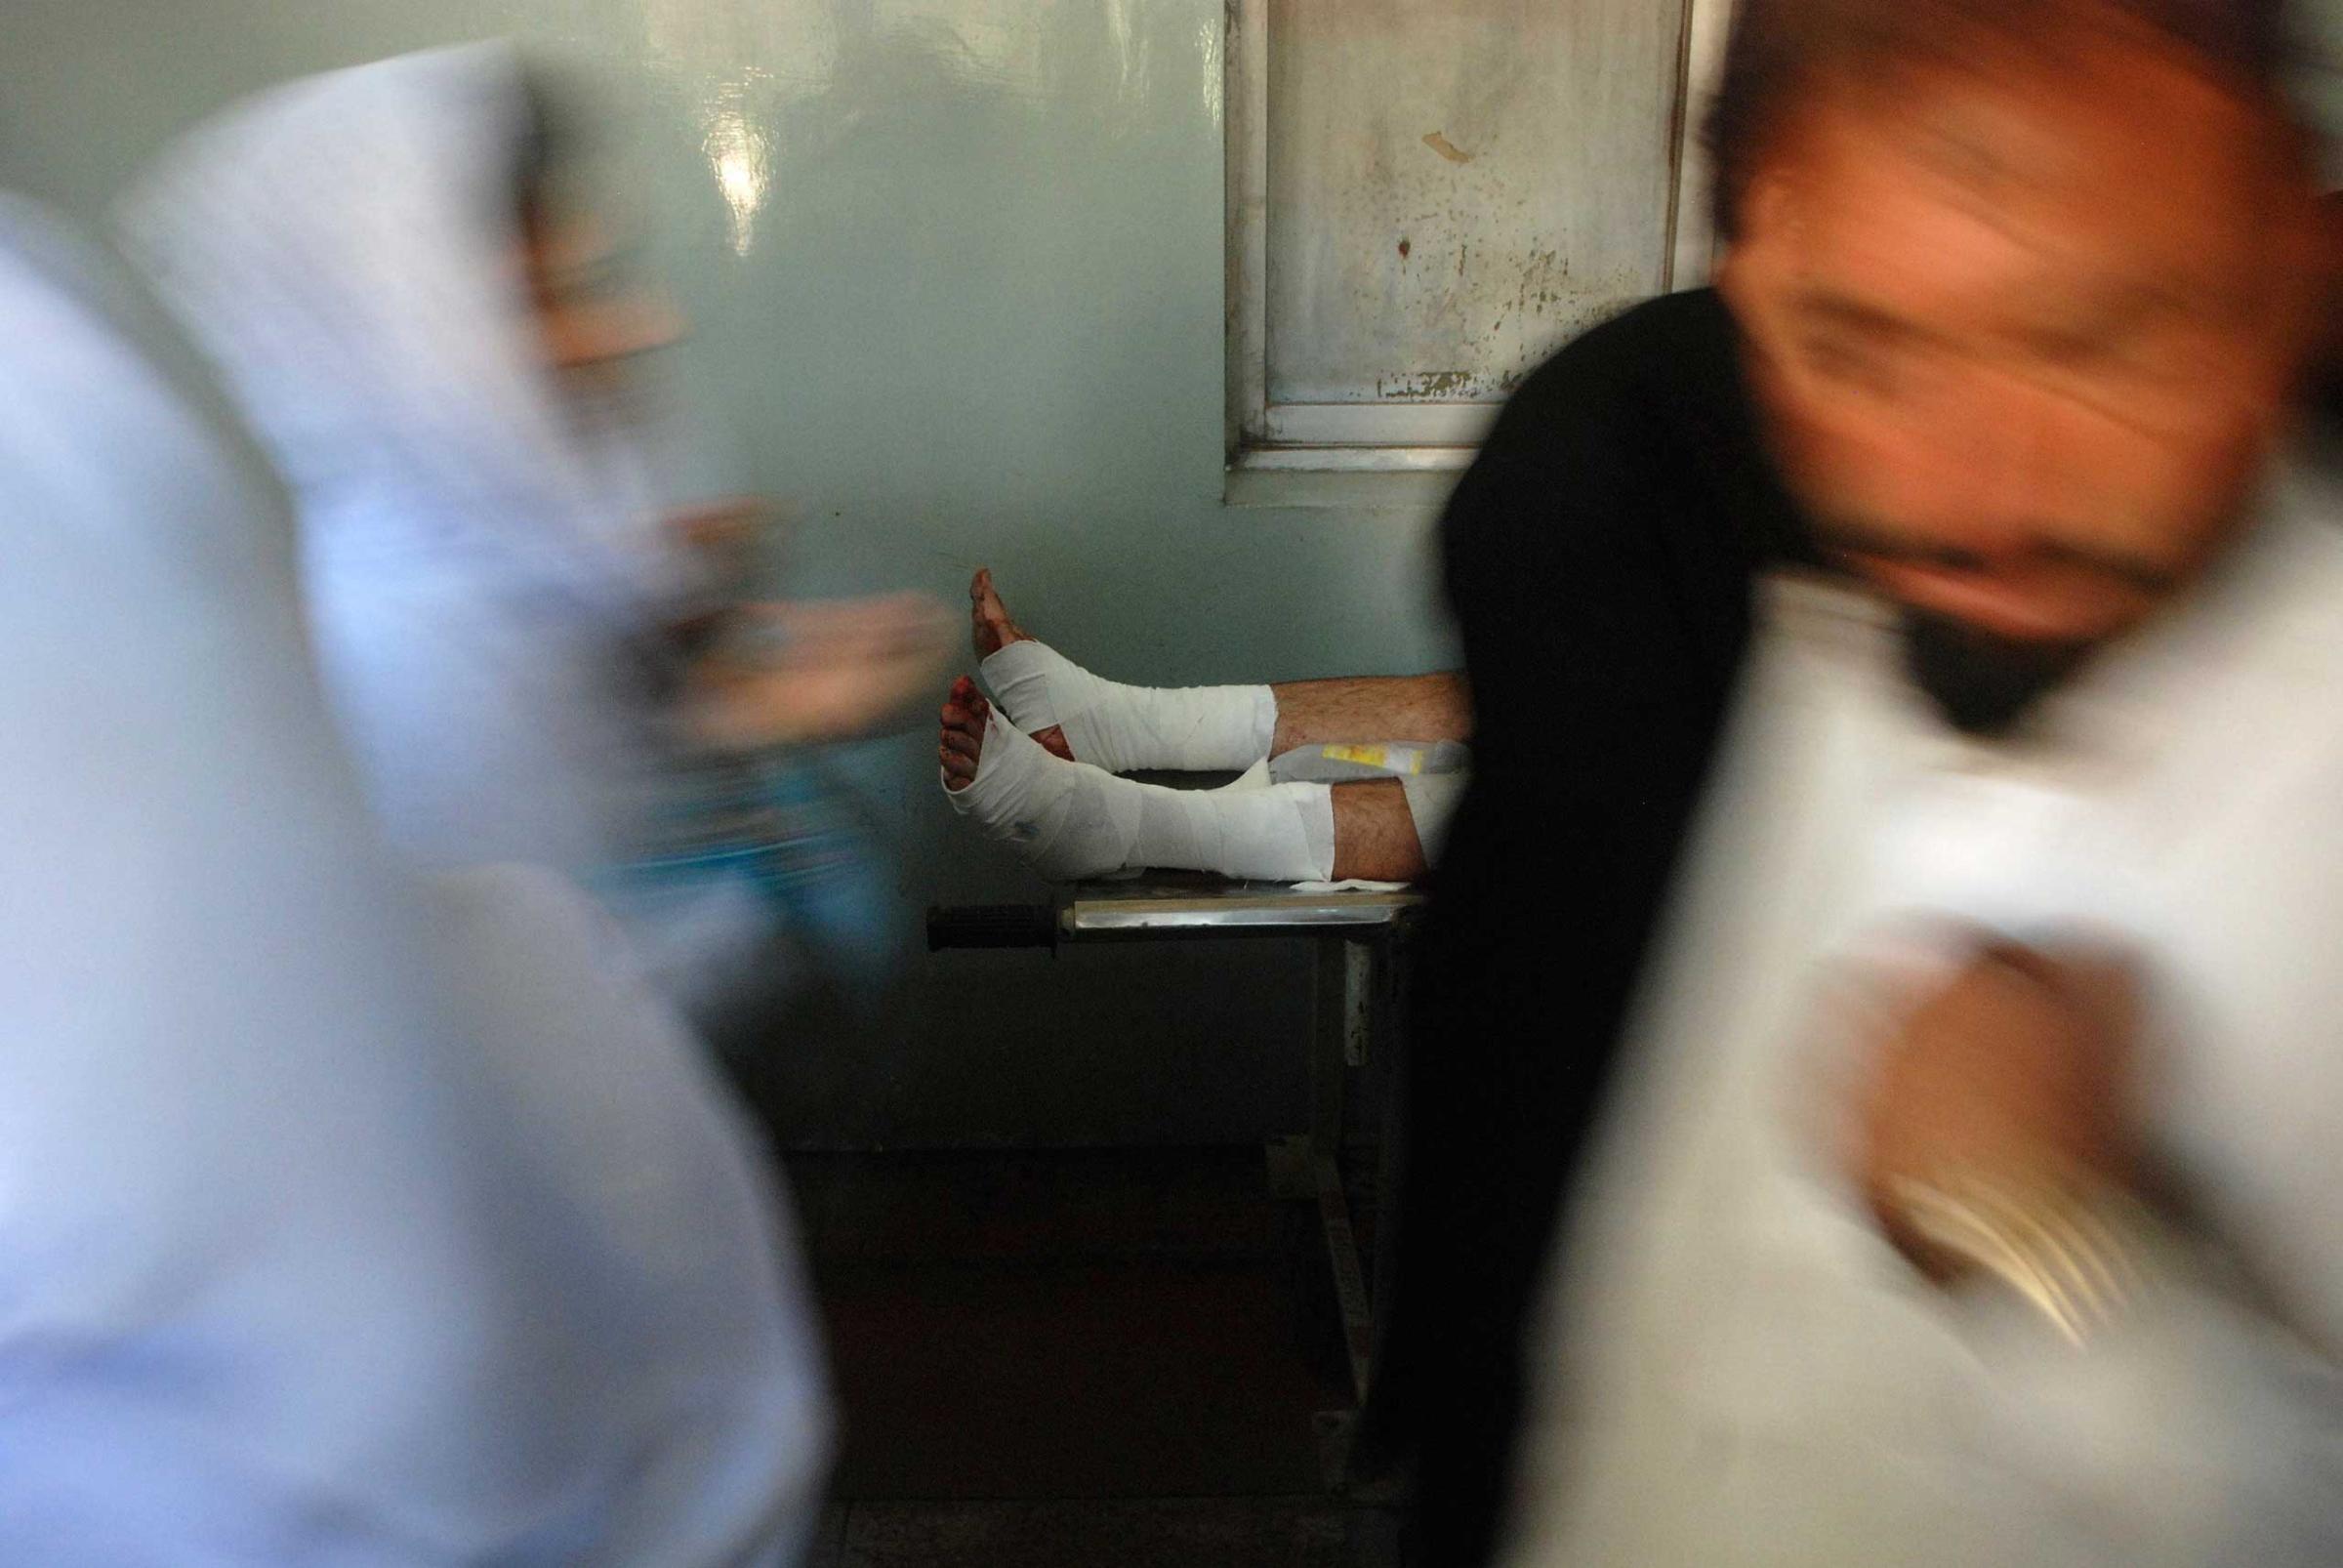 People move past a man, who was wounded in an explosion in a Shi'ite mosque, as he lies on a stretcher at a hospital in Peshawar Feb. 13, 2015.